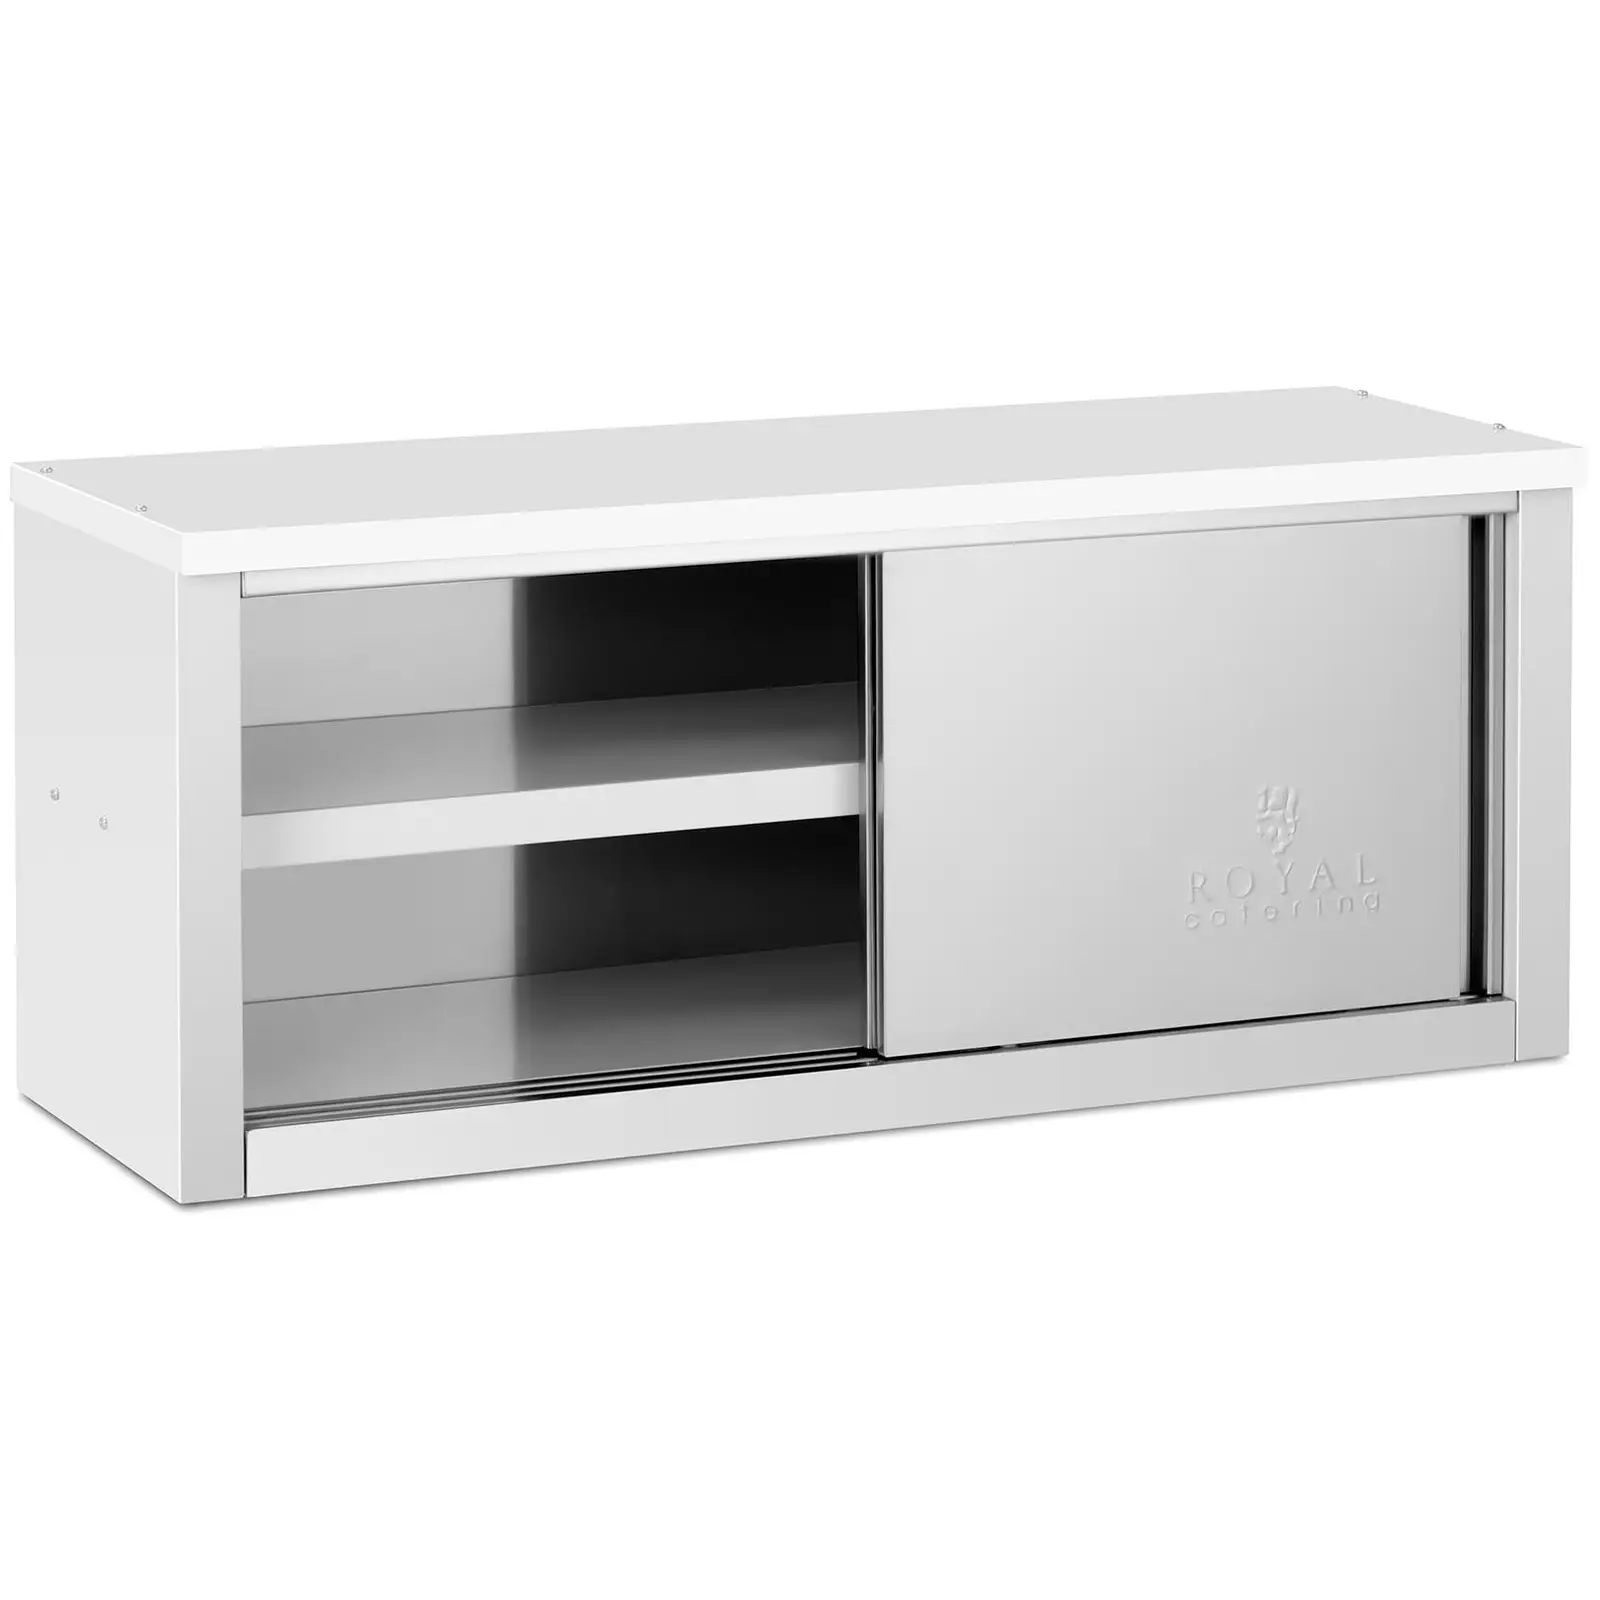 Hanging Cabinet - 1,200 x 400 x 500 mm - 65 kg load capacity per compartment - Royal Catering